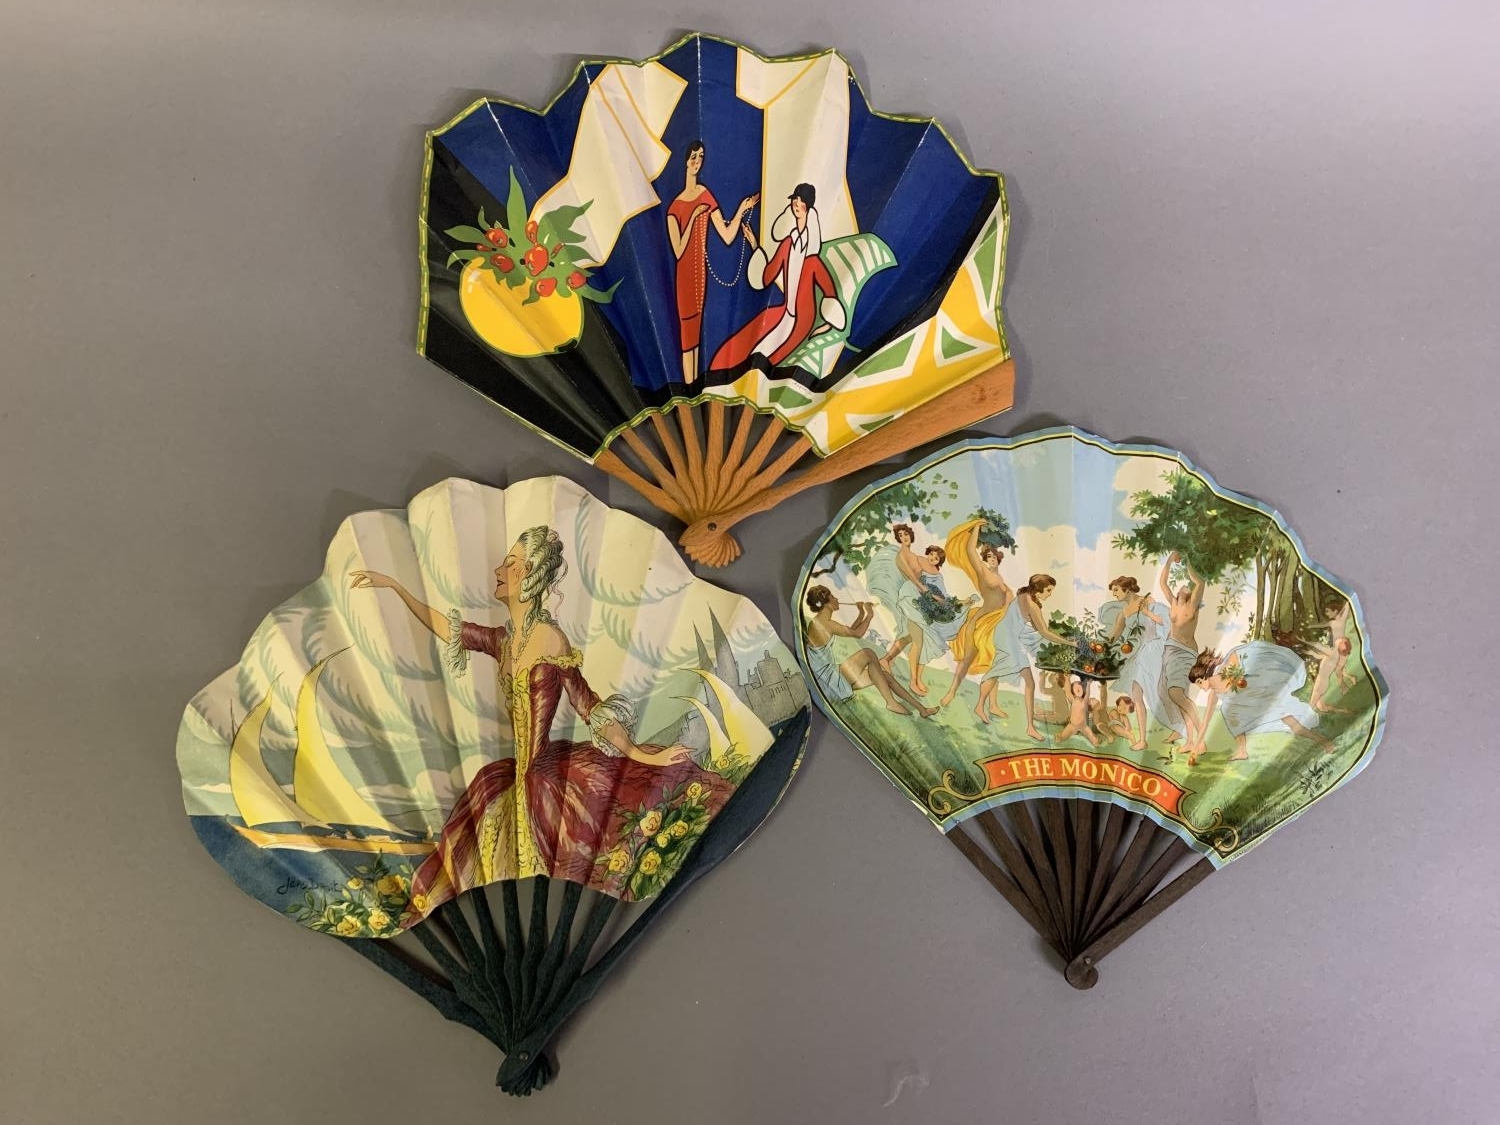 A very Deco ballon fan, unusually with straight sides, showing an elegant lady choosing her